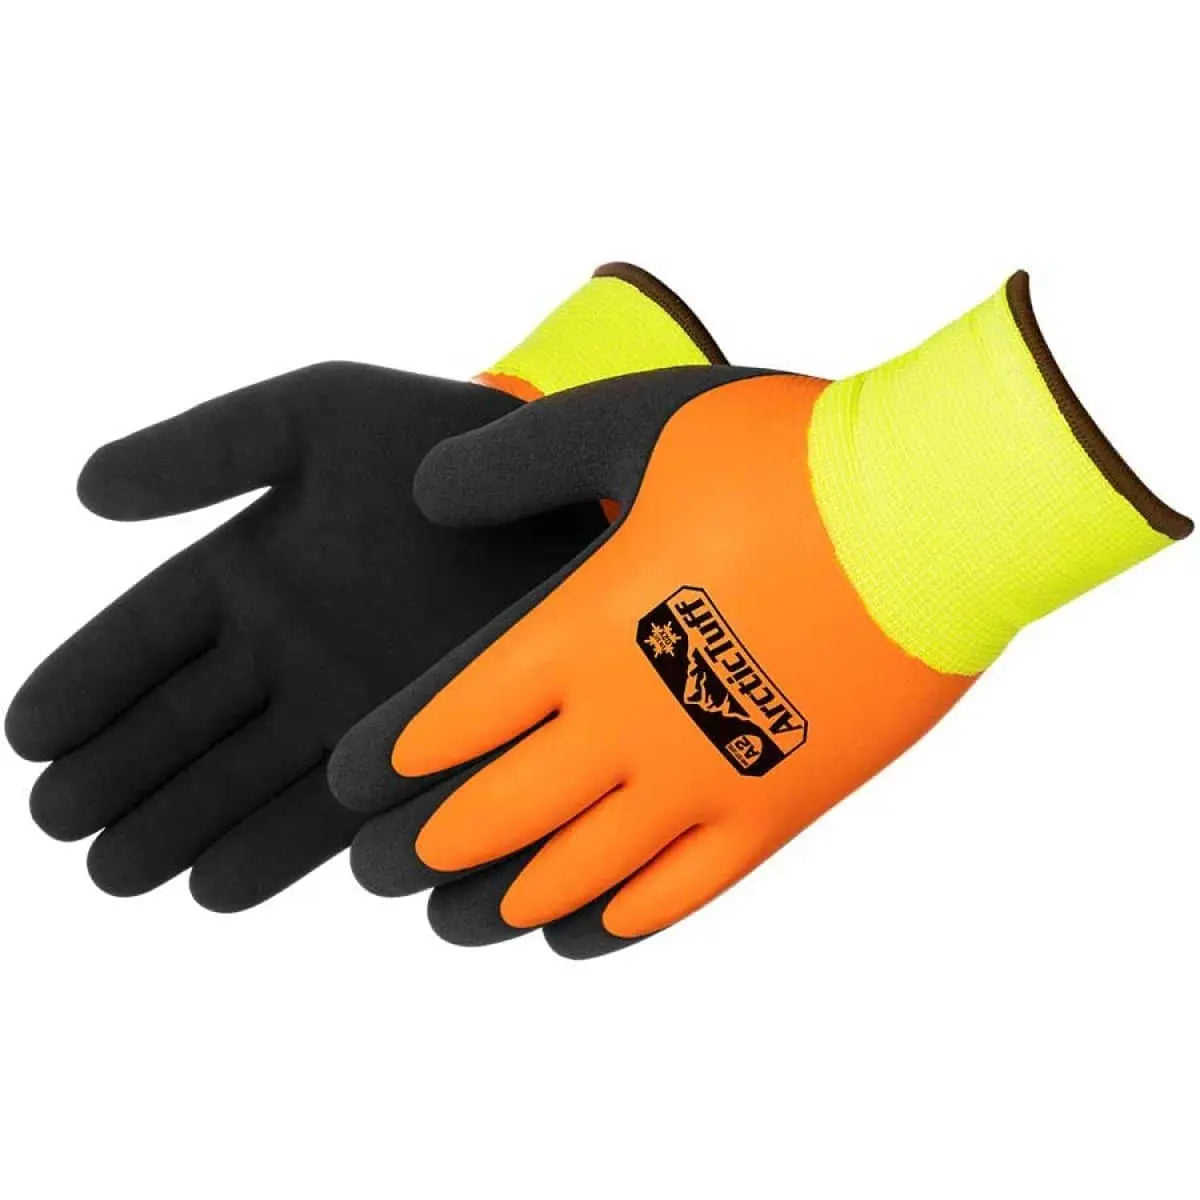 LIBERTY - Artic Tuff Foam Latex Thermal Shell with Lining, Orange - Becker Safety and Supply